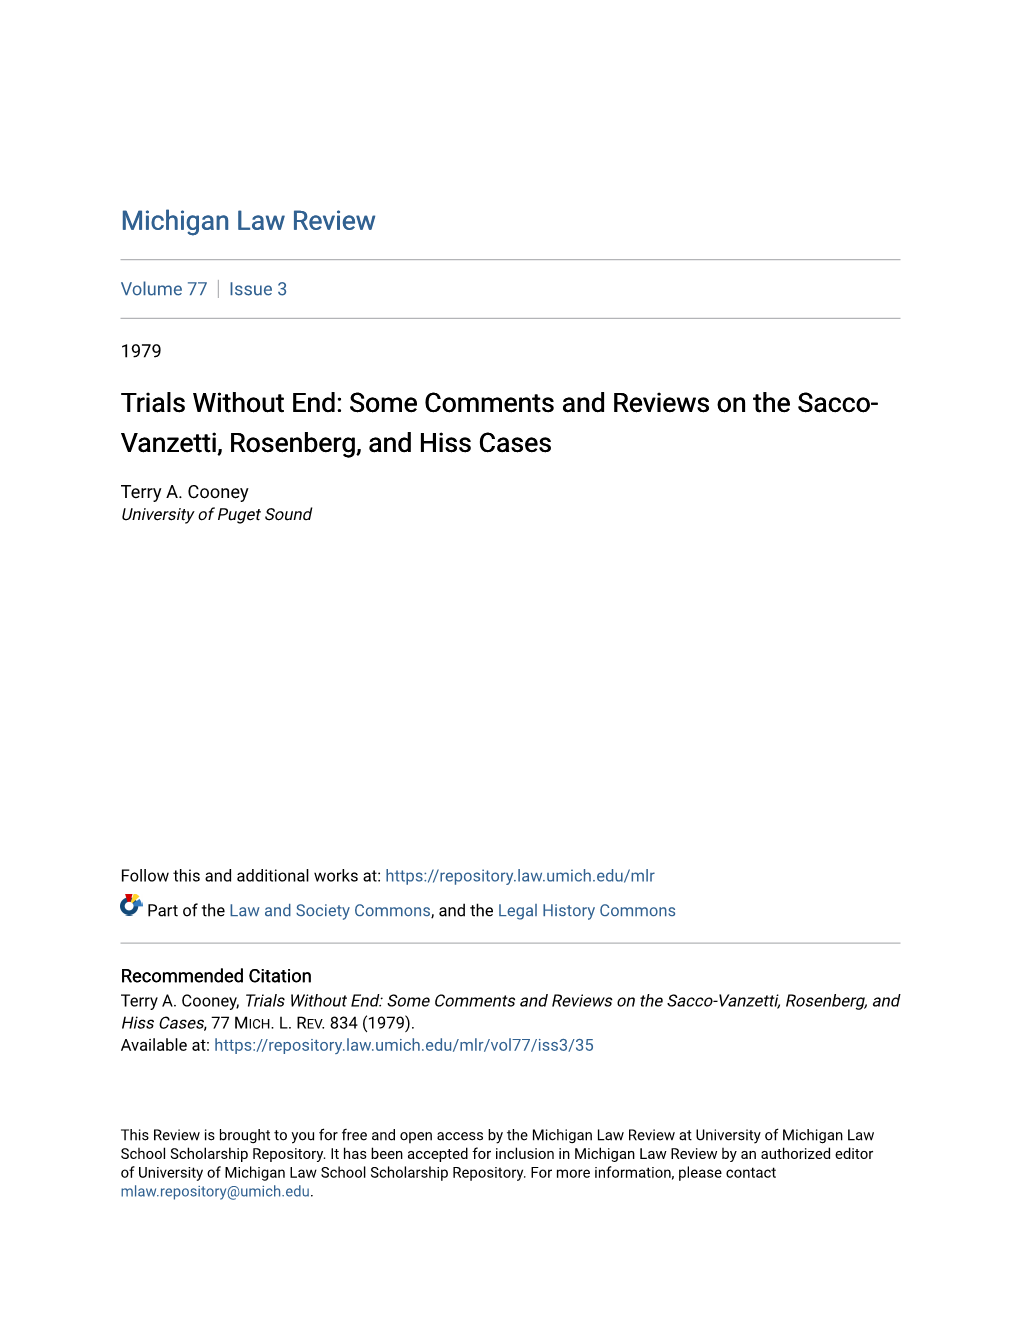 Some Comments and Reviews on the Sacco-Vanzetti, Rosenberg, and Hiss Cases, 77 MICH